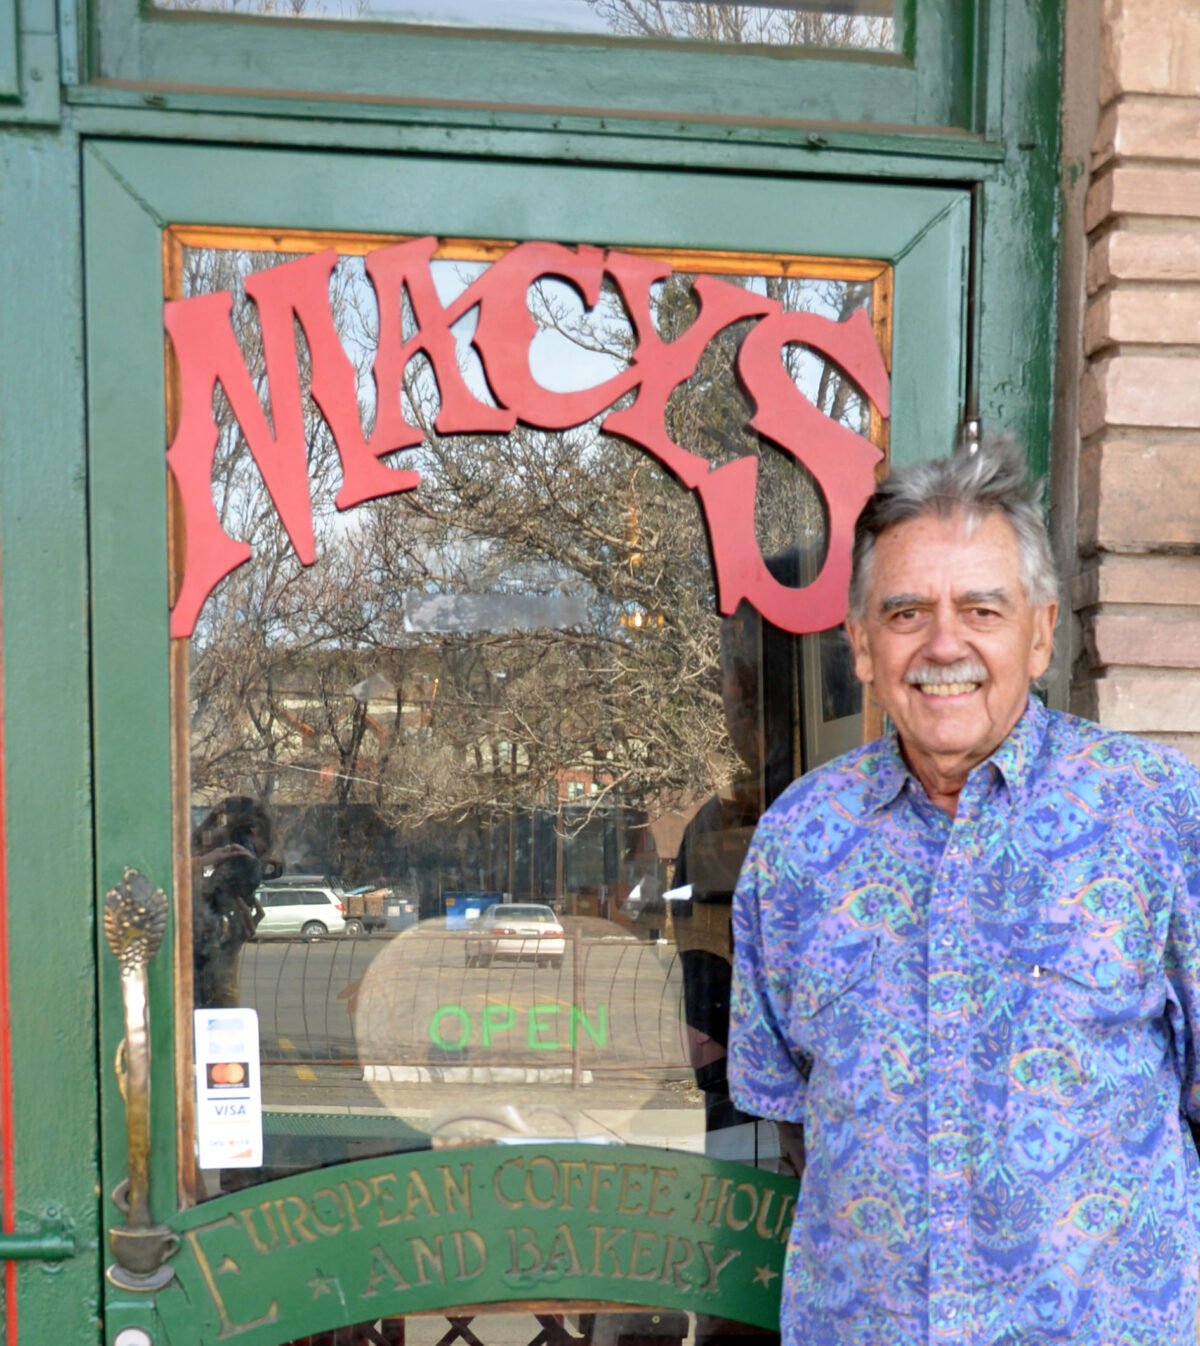 The ultimate cup: Macy’s European Coffee House and Bakery celebrates 40 years in Flagstaff